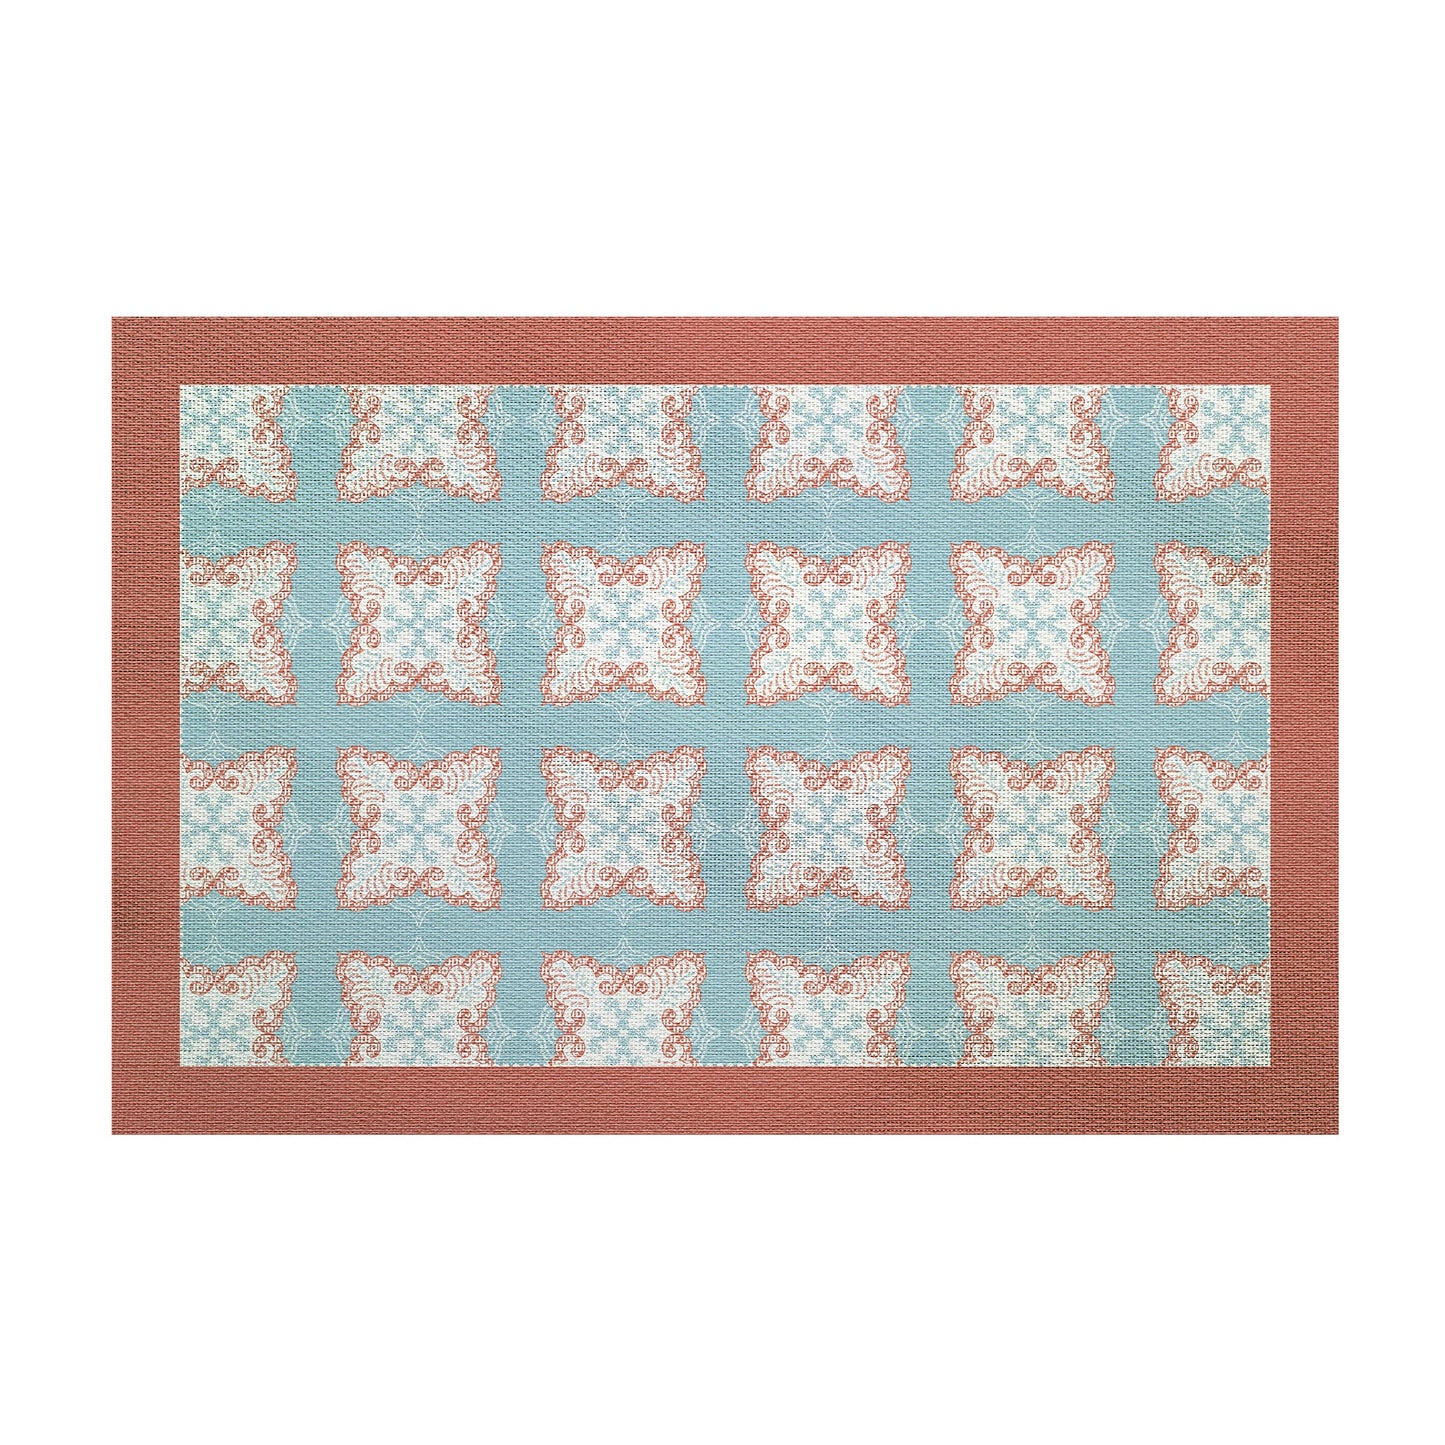 "Boho Paisley Chic" Woven Table Placemat